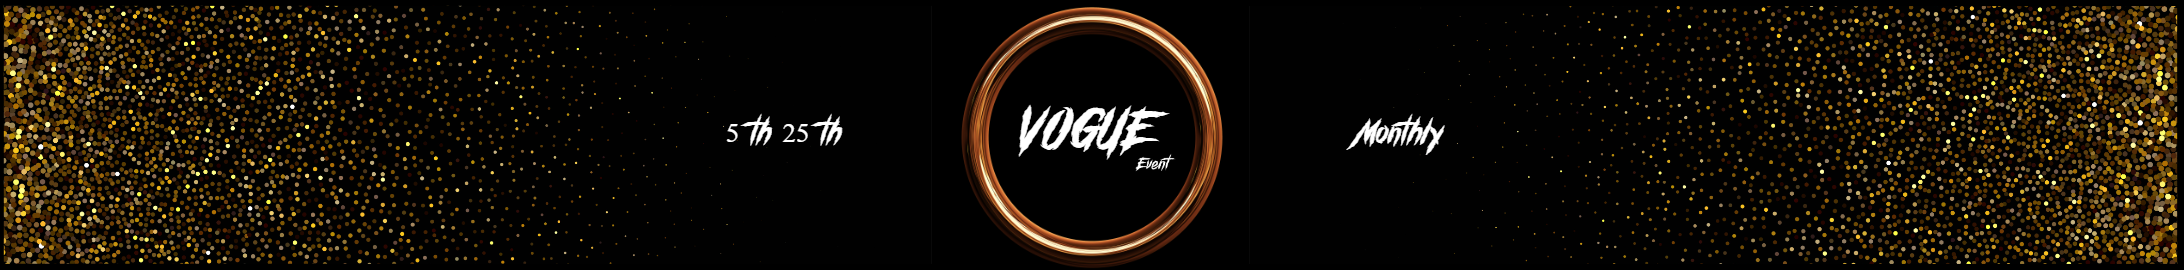 SPOIL YOURSELF AT THE VOGUE EVENT!